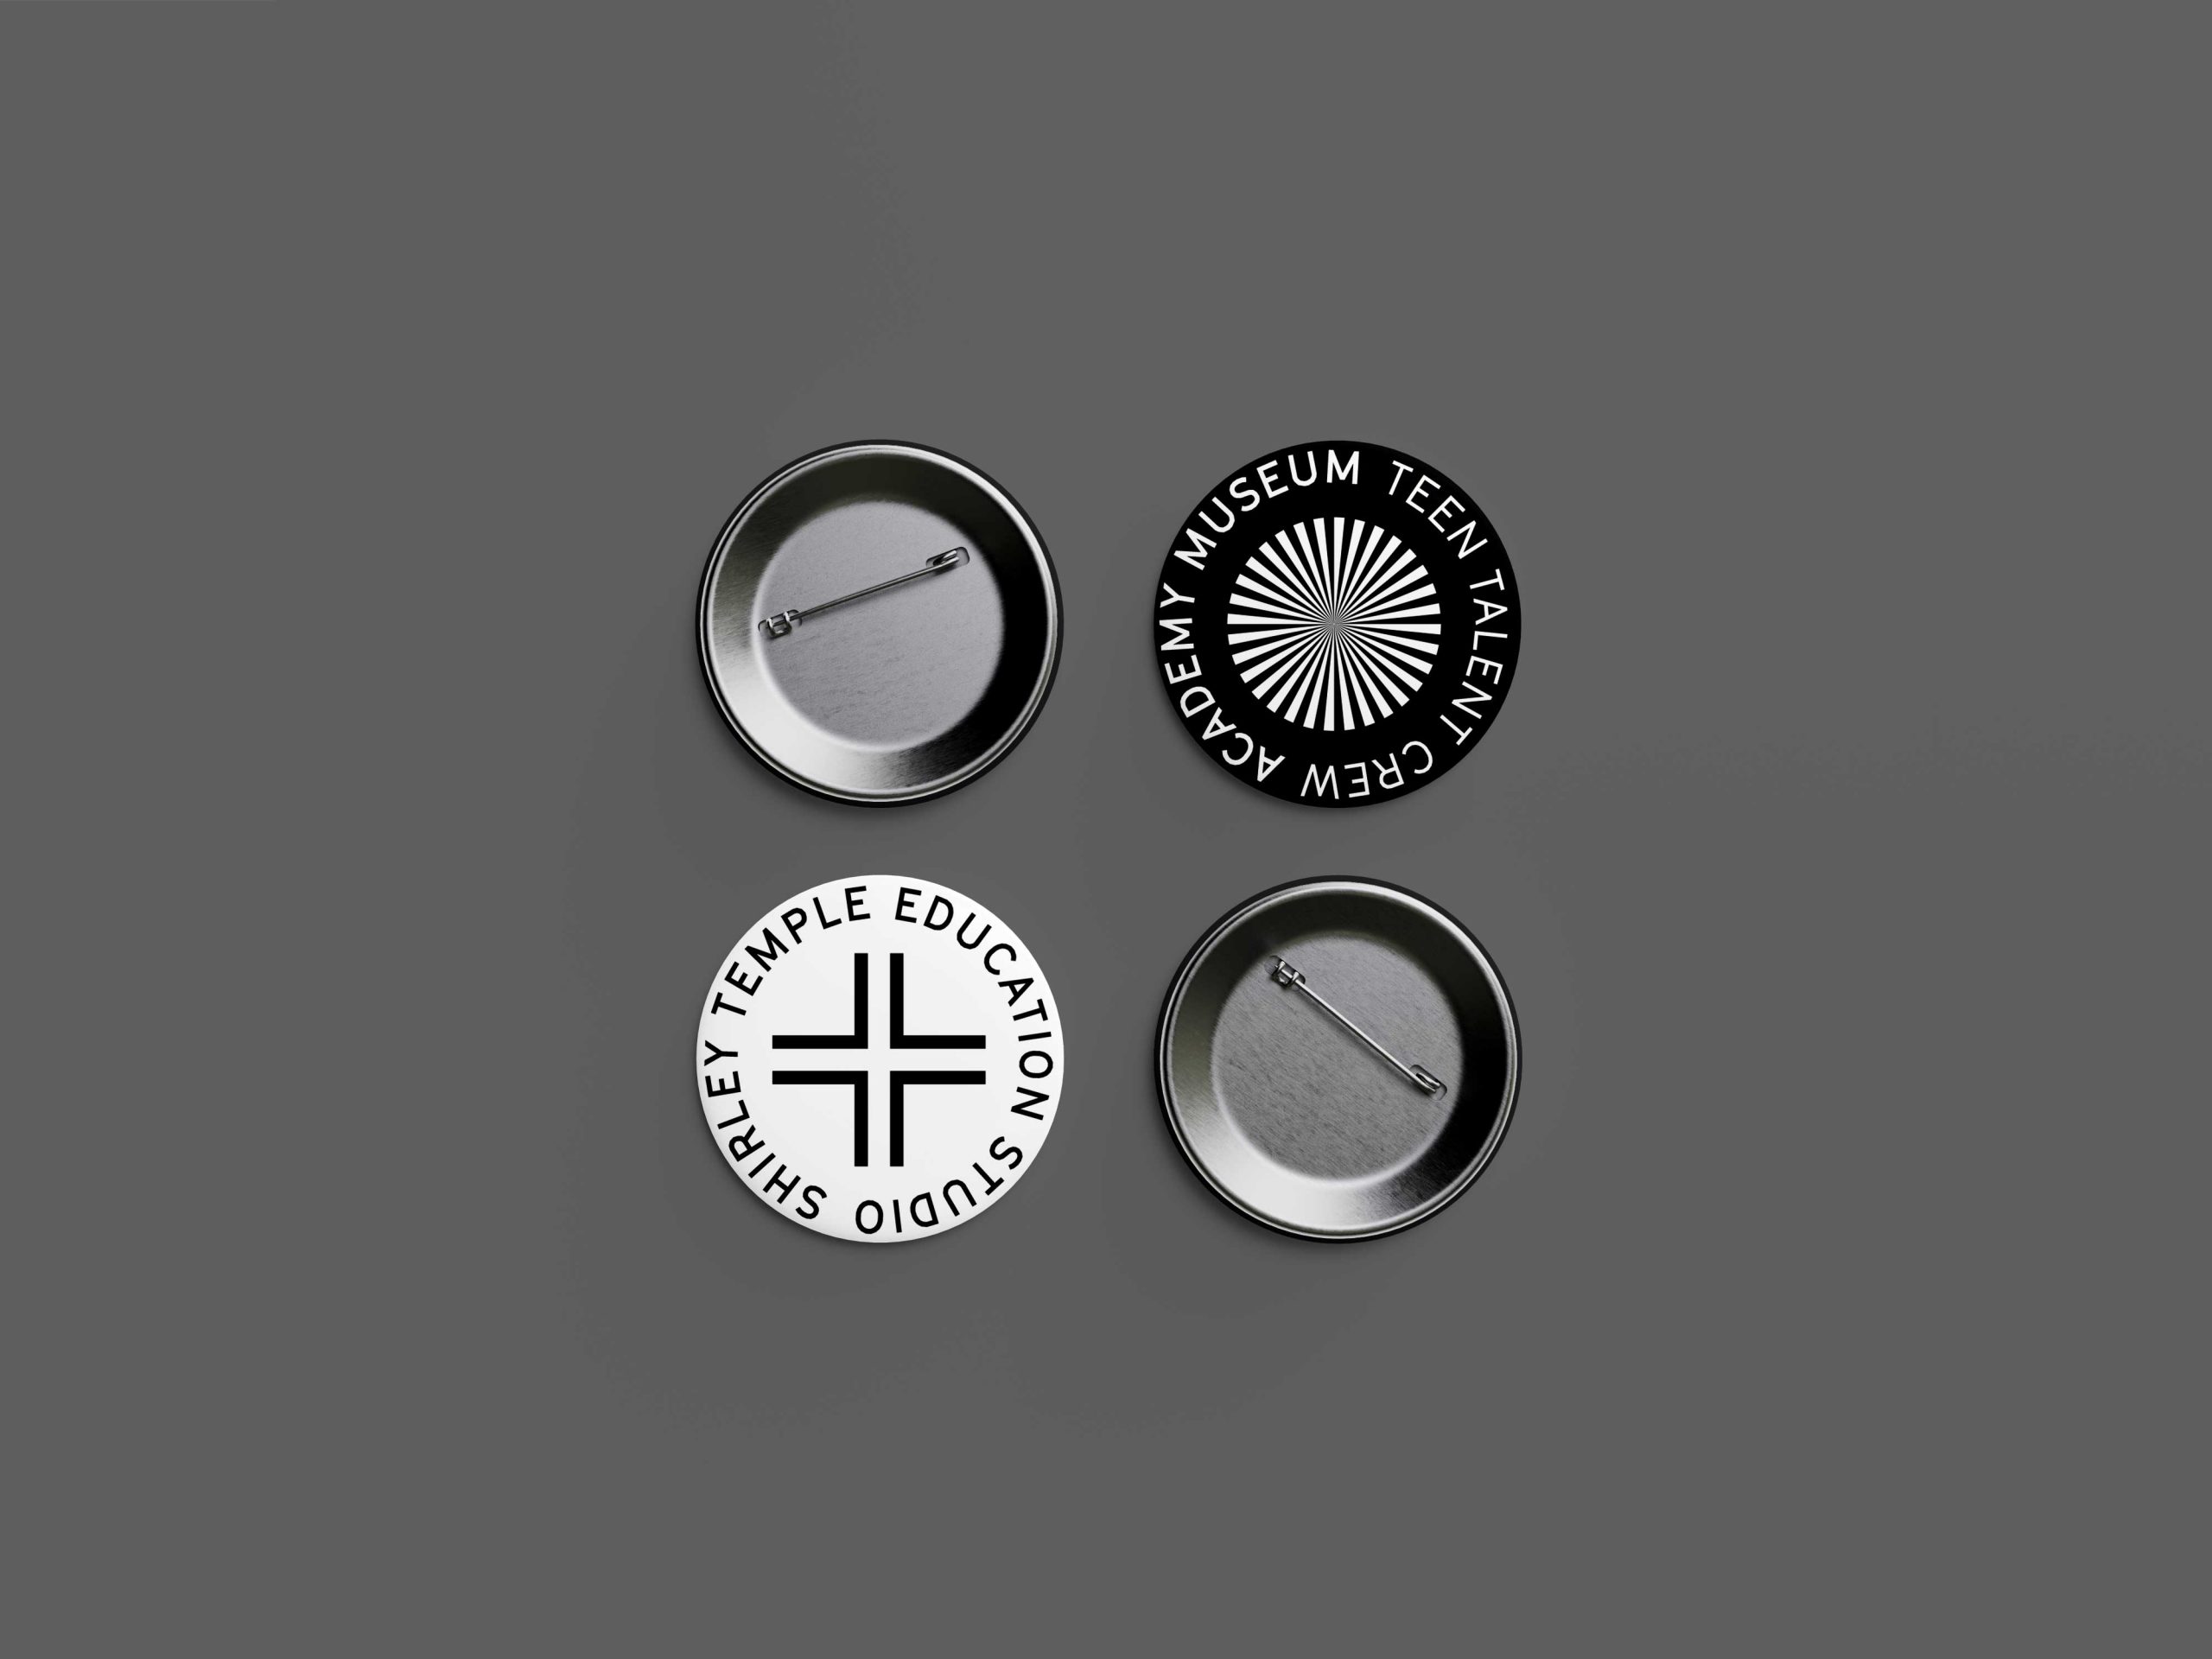 Vedros_AcademyMuseum_Buttons_2